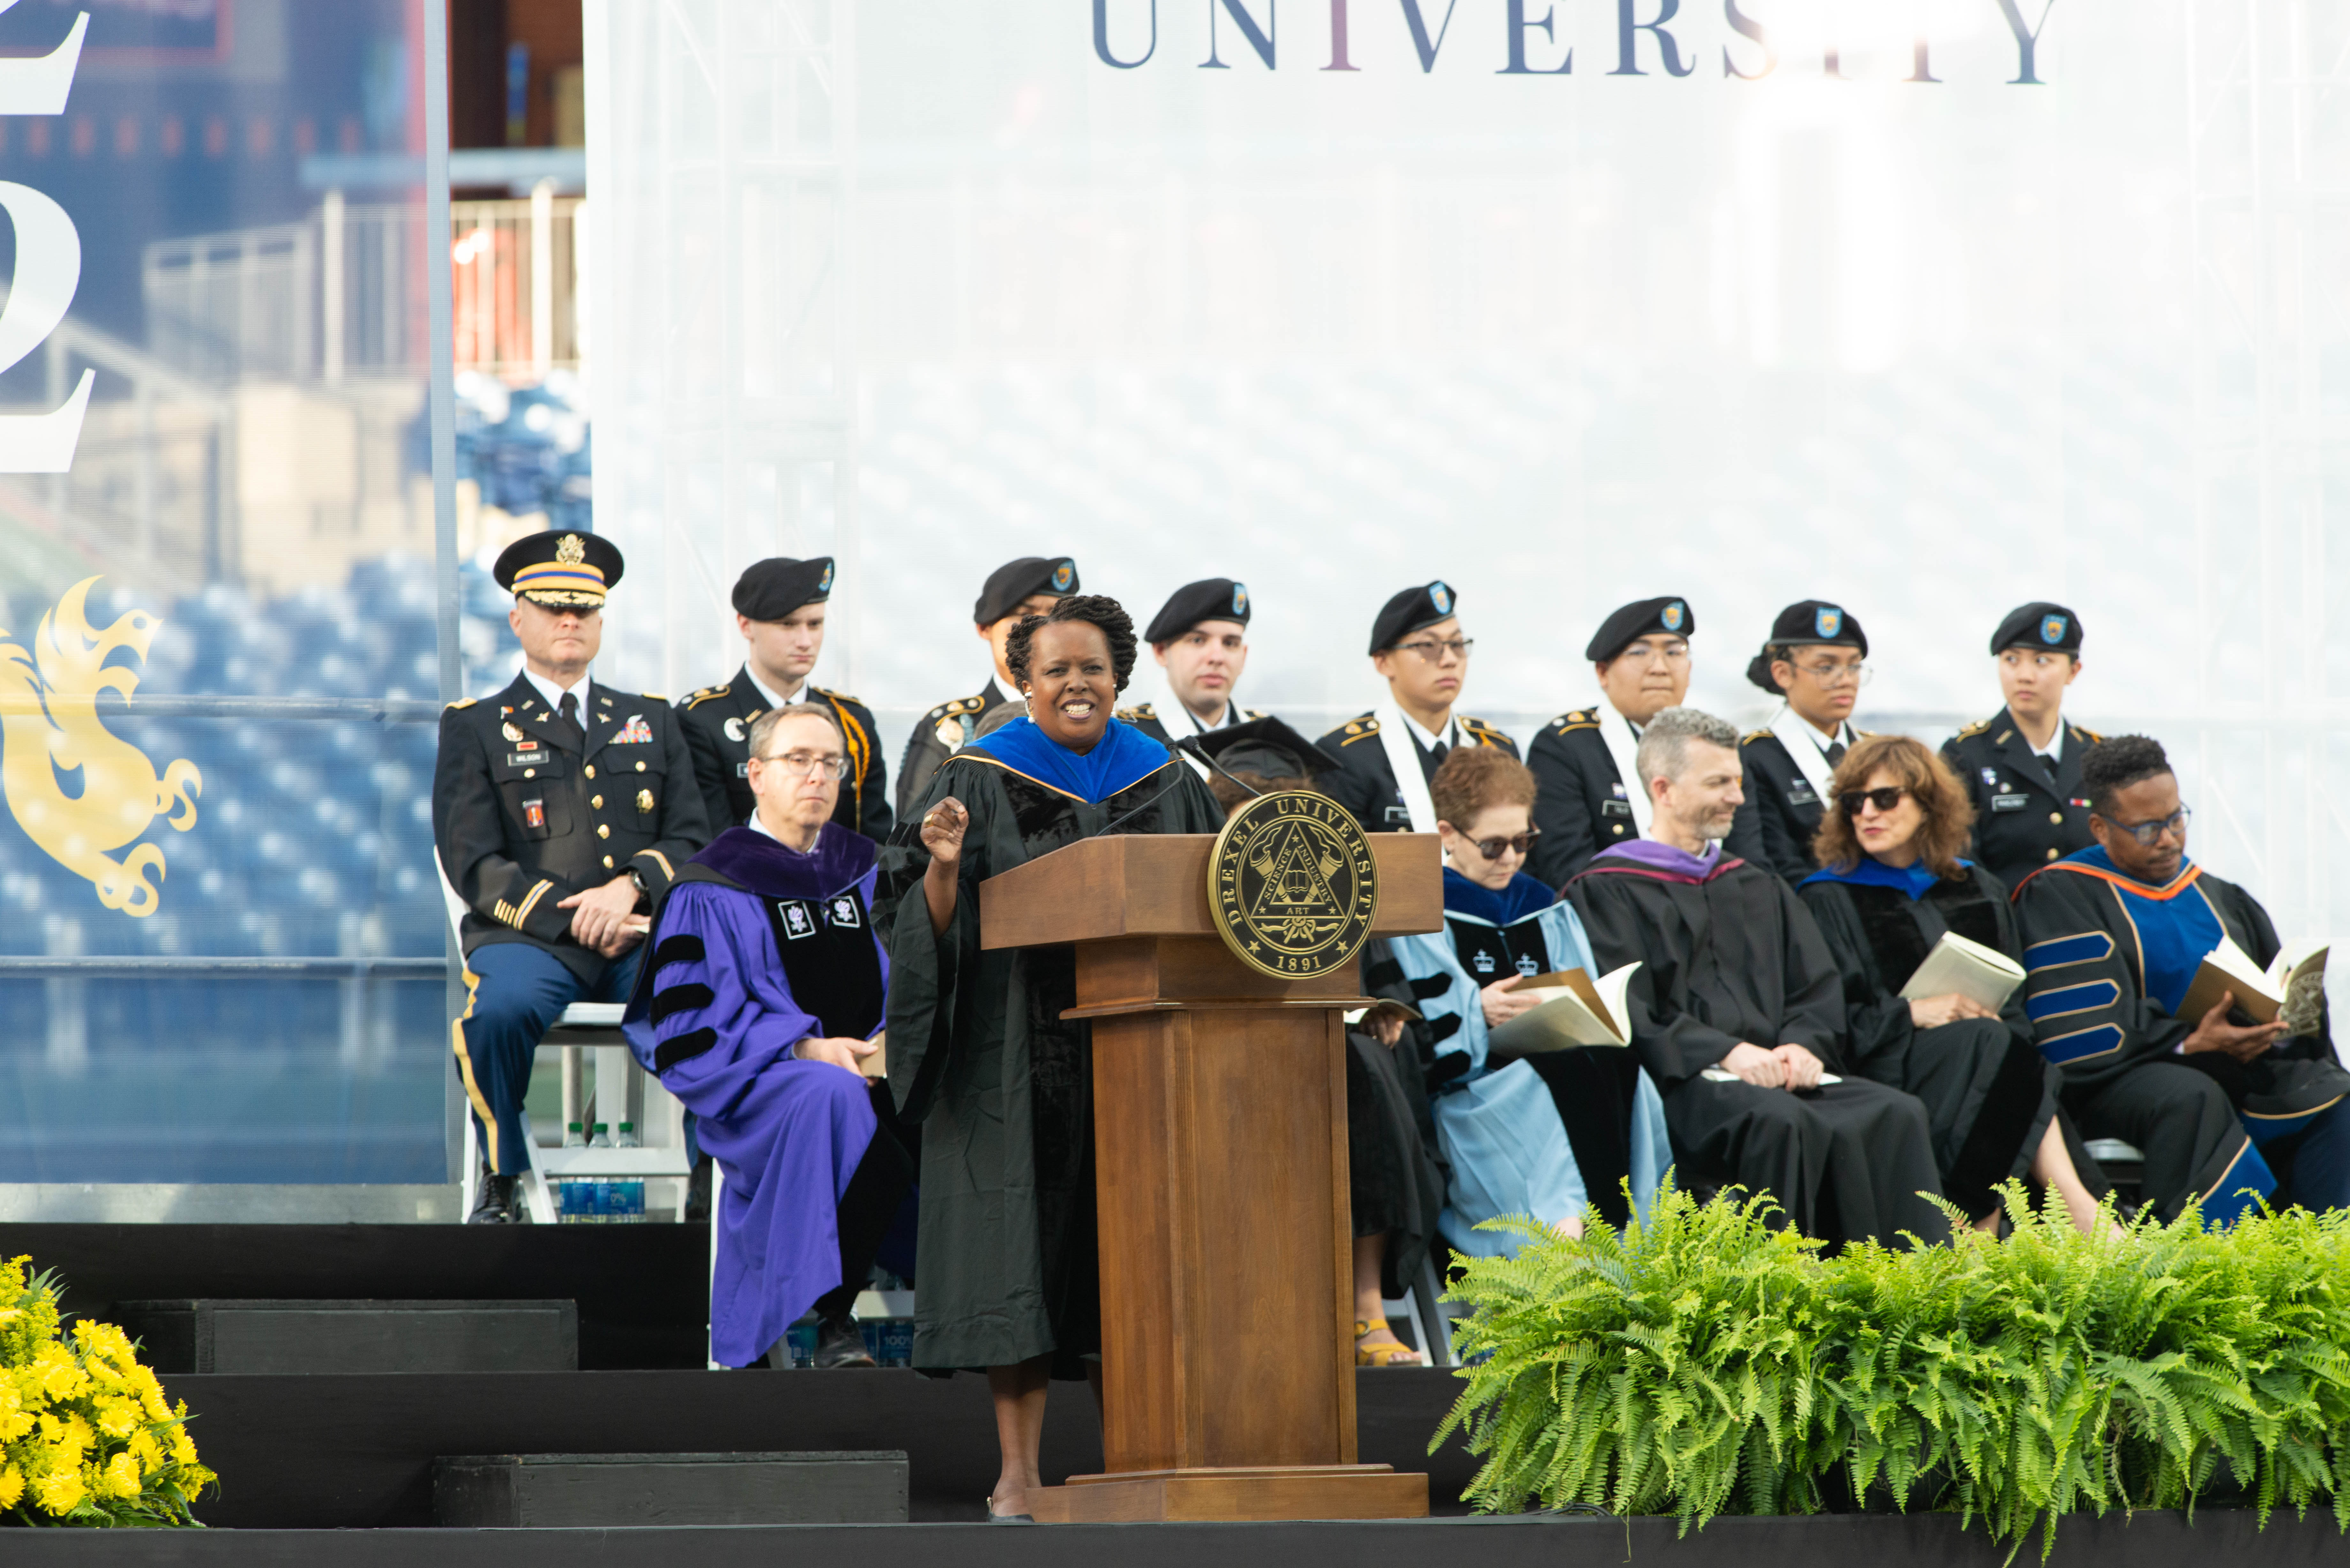 Evelyn Thimba speaks at the podium at Drexel's 2022 Commencement.